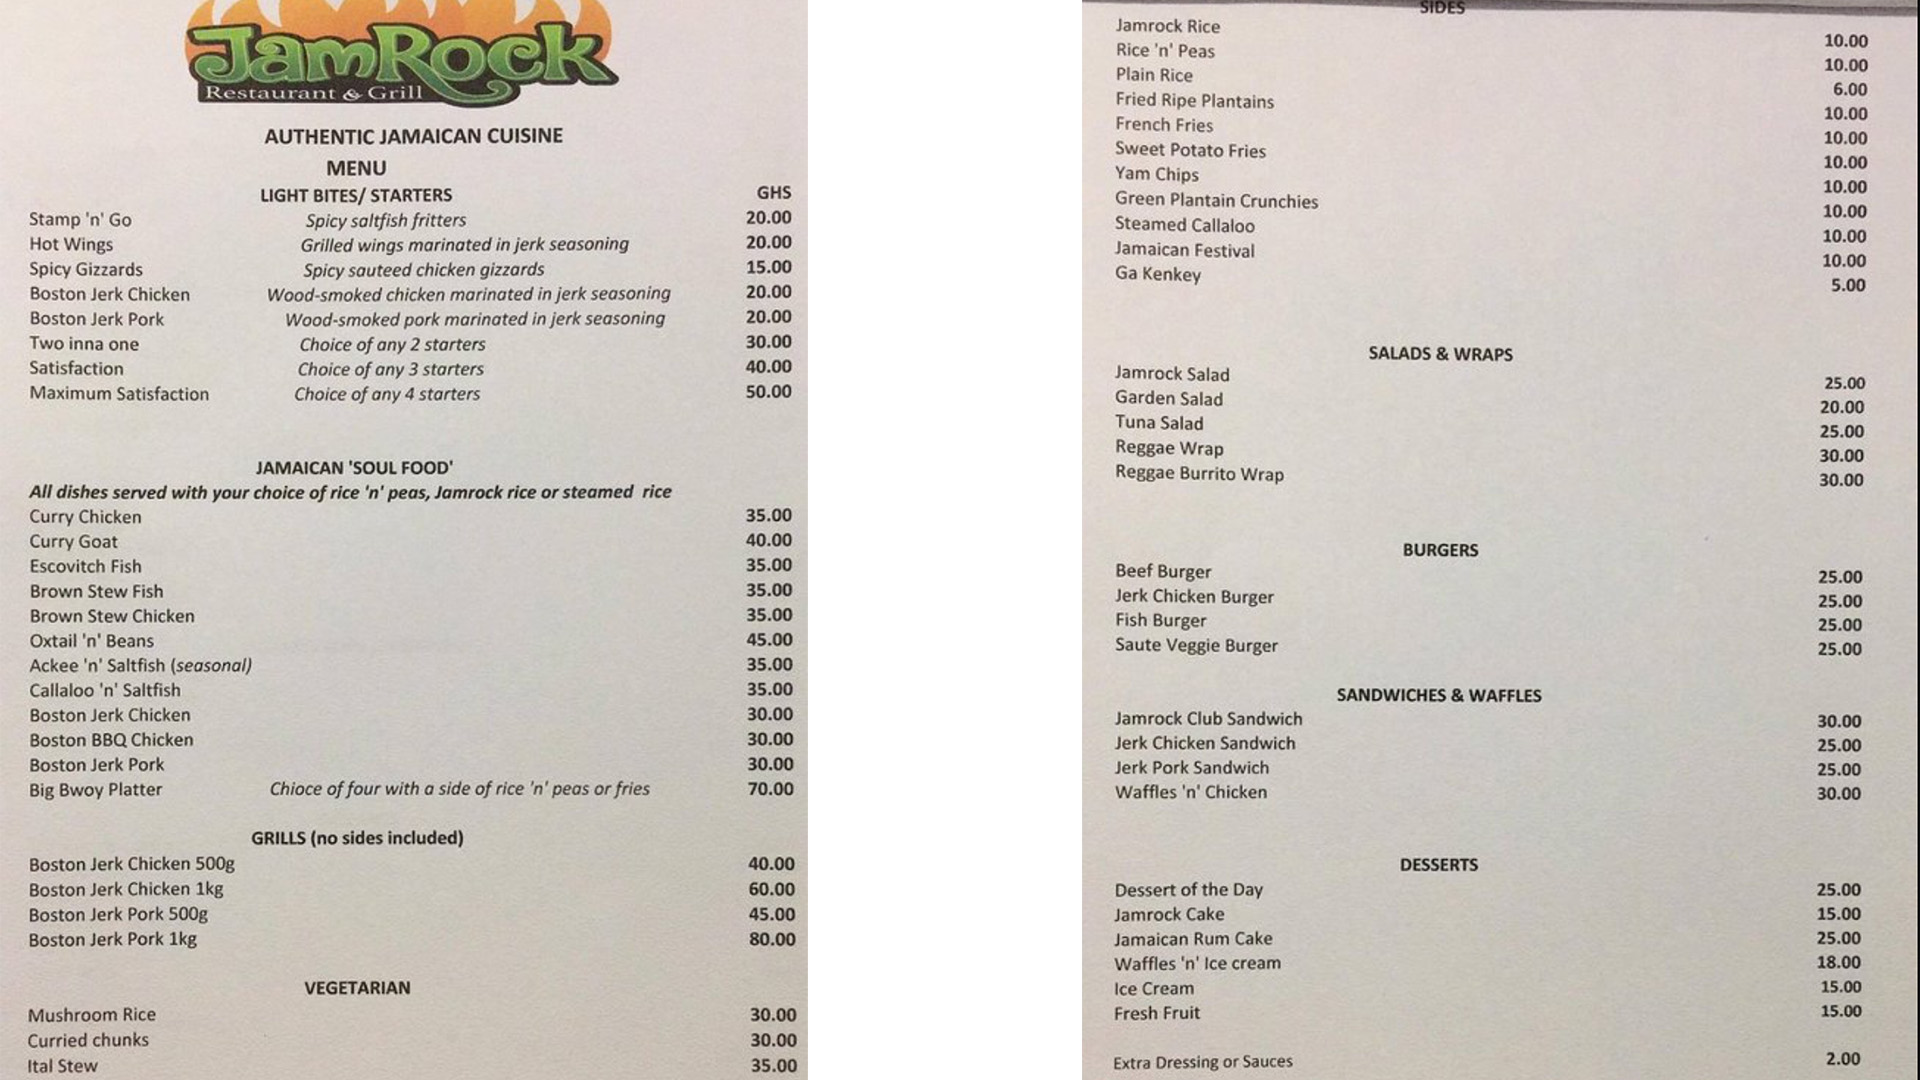 Jam Rock Restaurant and Grill Menu and Prices